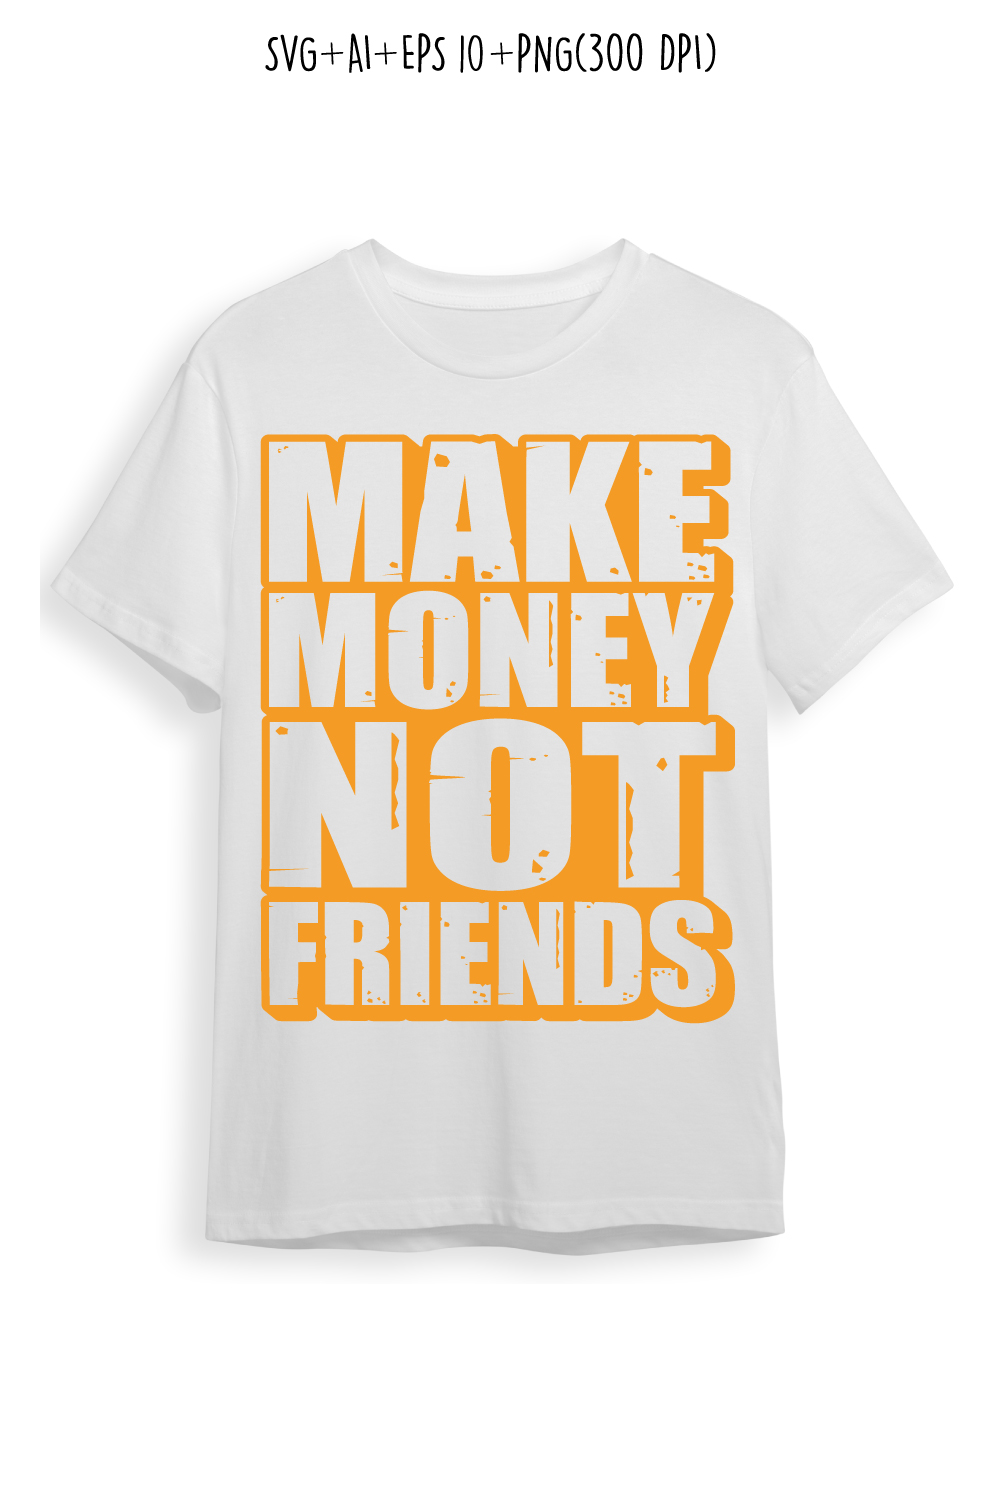 Make money not friends motivational quote typography for Tshirt design, mug, print pinterest preview image.